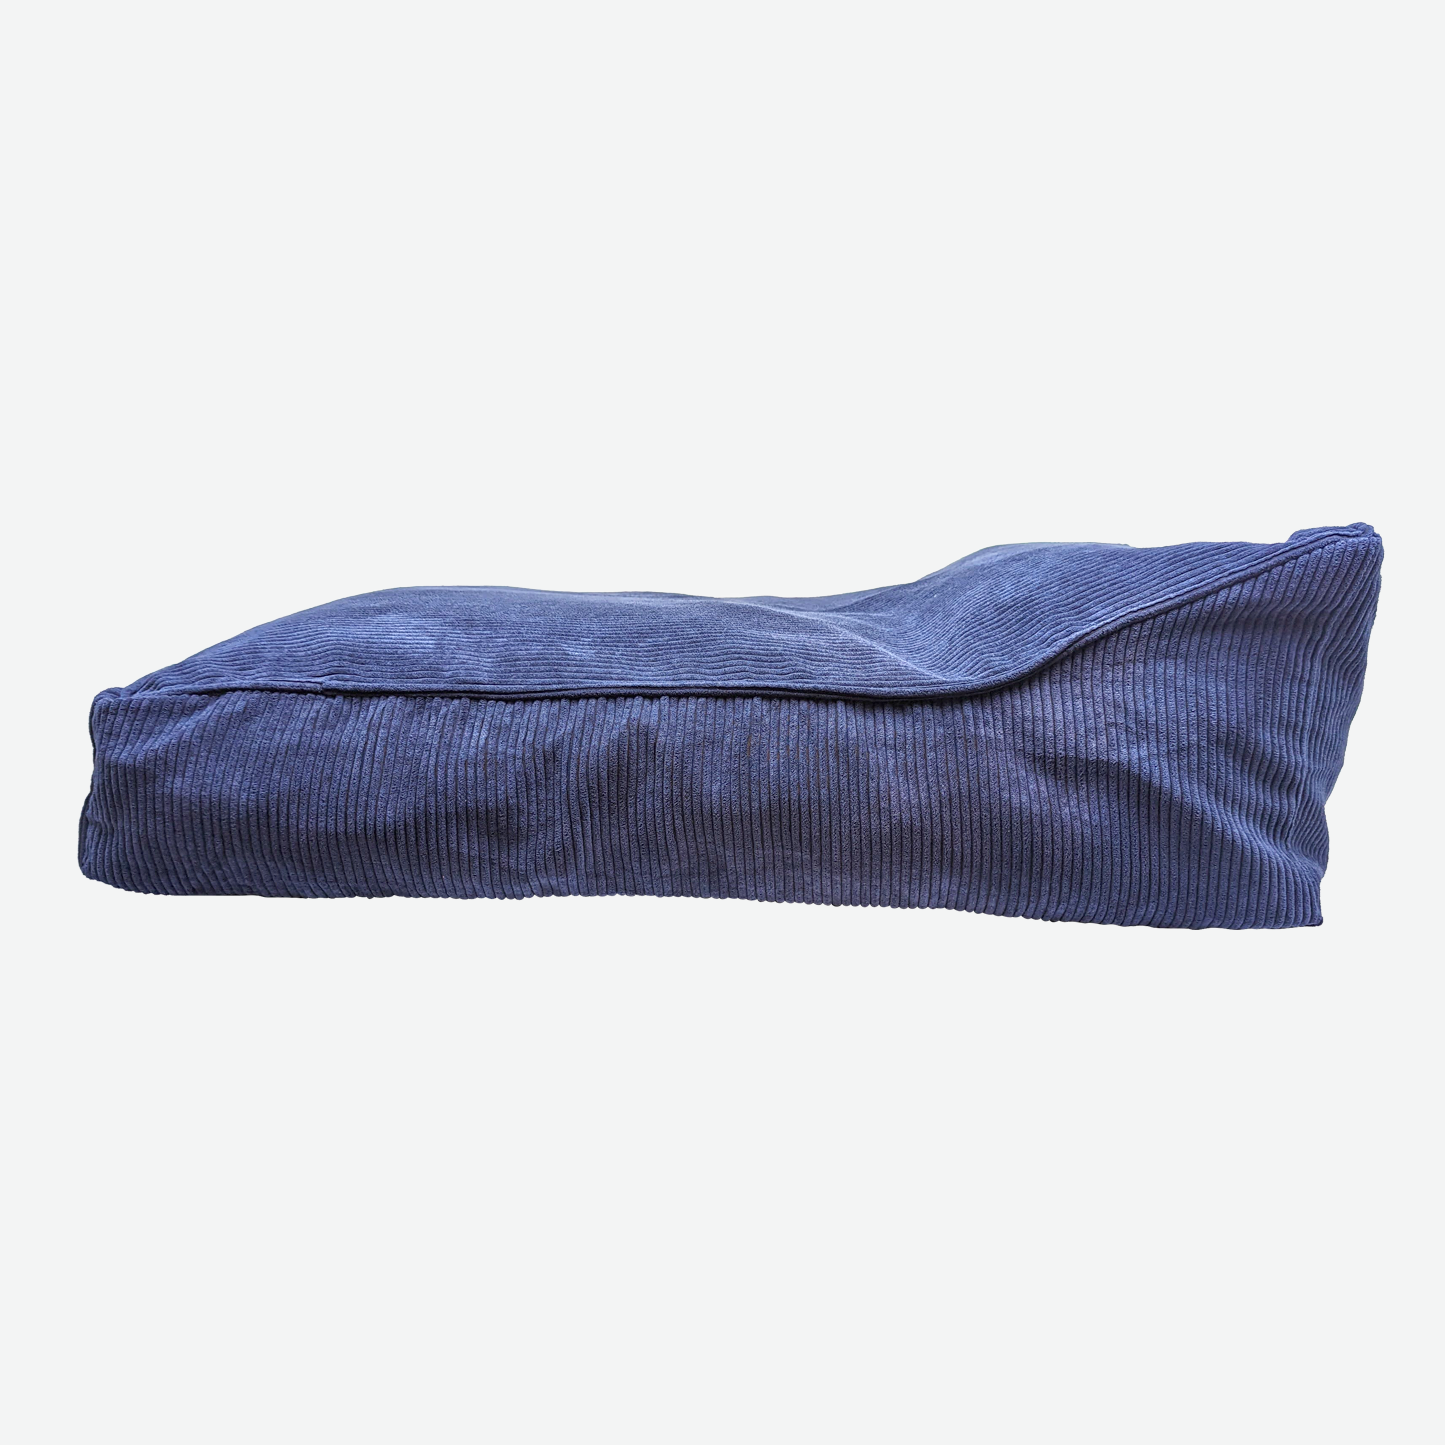 Memory foam dog bed with headrest, navy blue